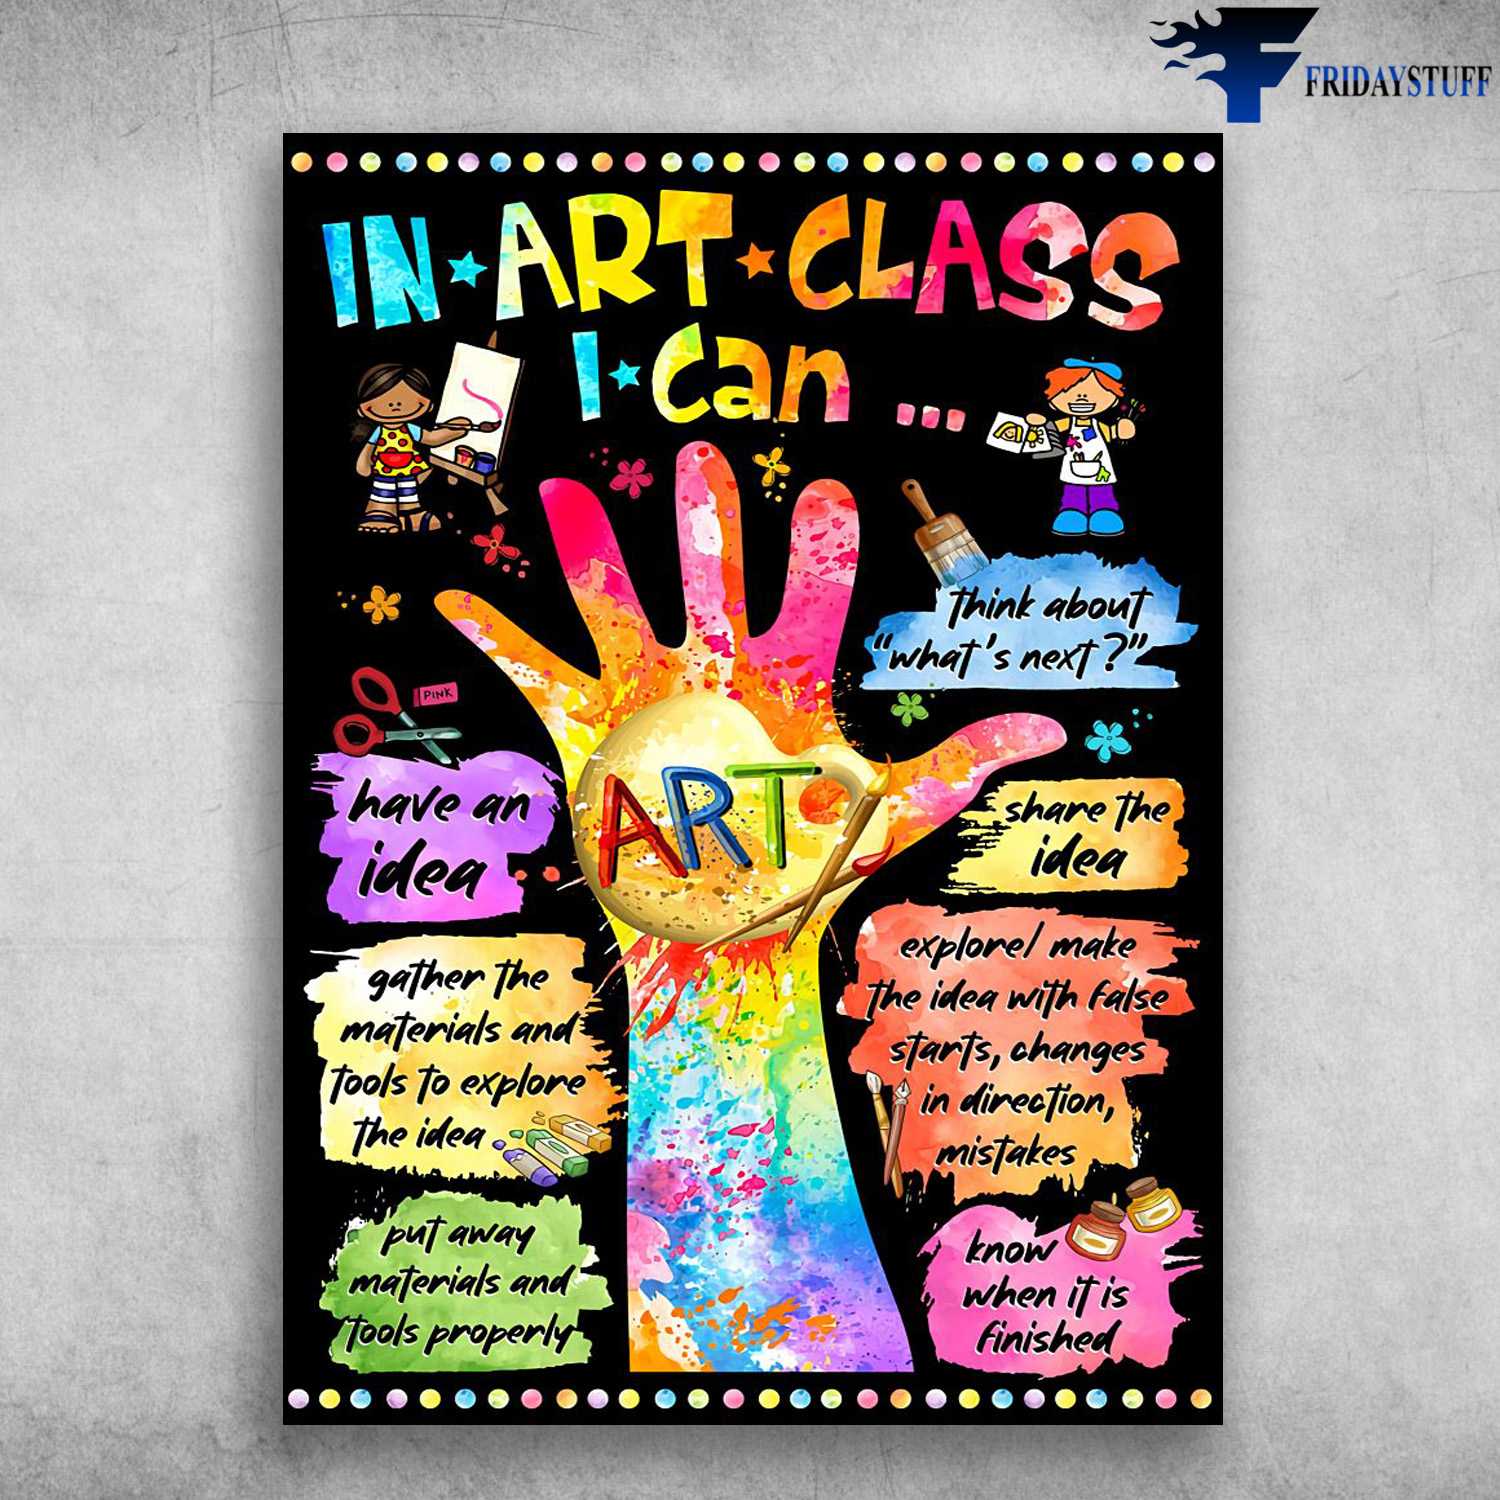 Art Class, Classroom Poster, In Art Class, I Can Have An Idea, Think About What's Next, Share The Idea, Have An Idea, Know When It Is Finished